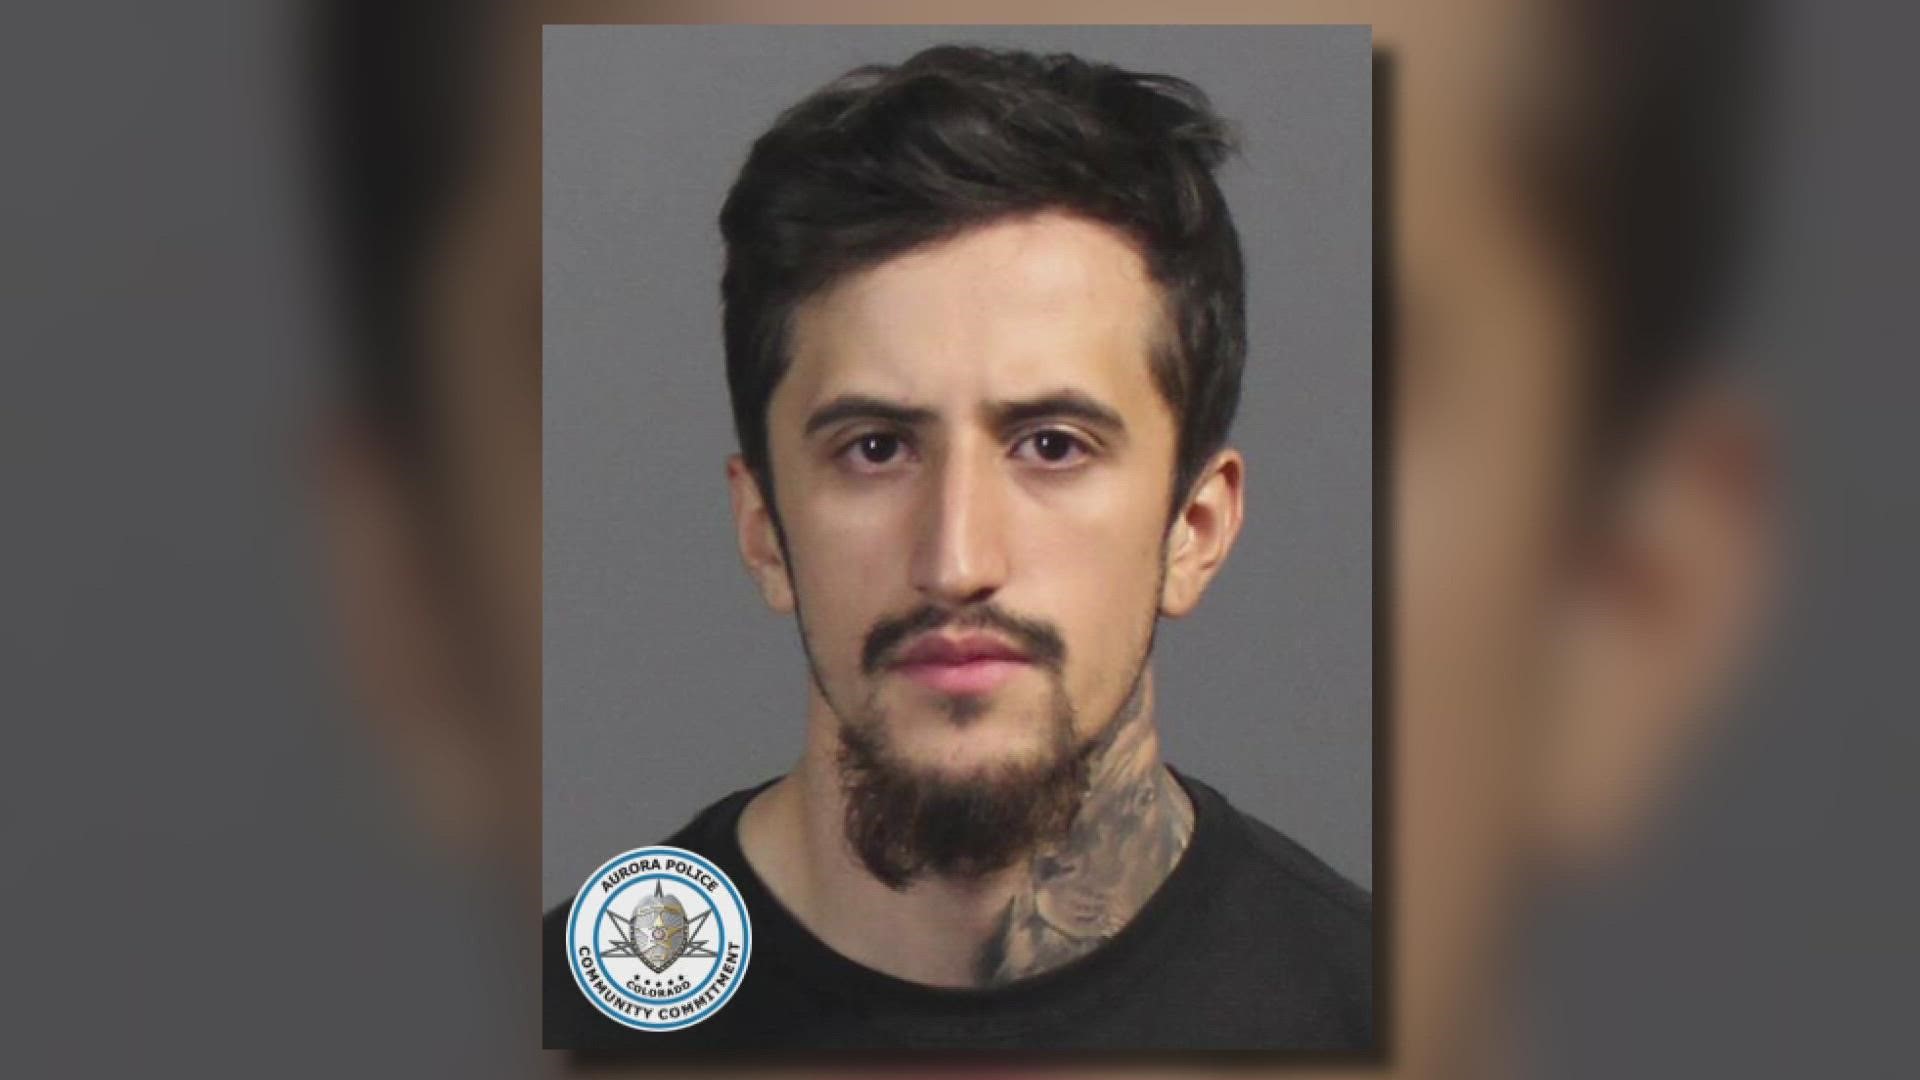 Juan Castorena, the brother of Joseph Castorena, was arrested in Denver and faces a charge of accessory after the fact.